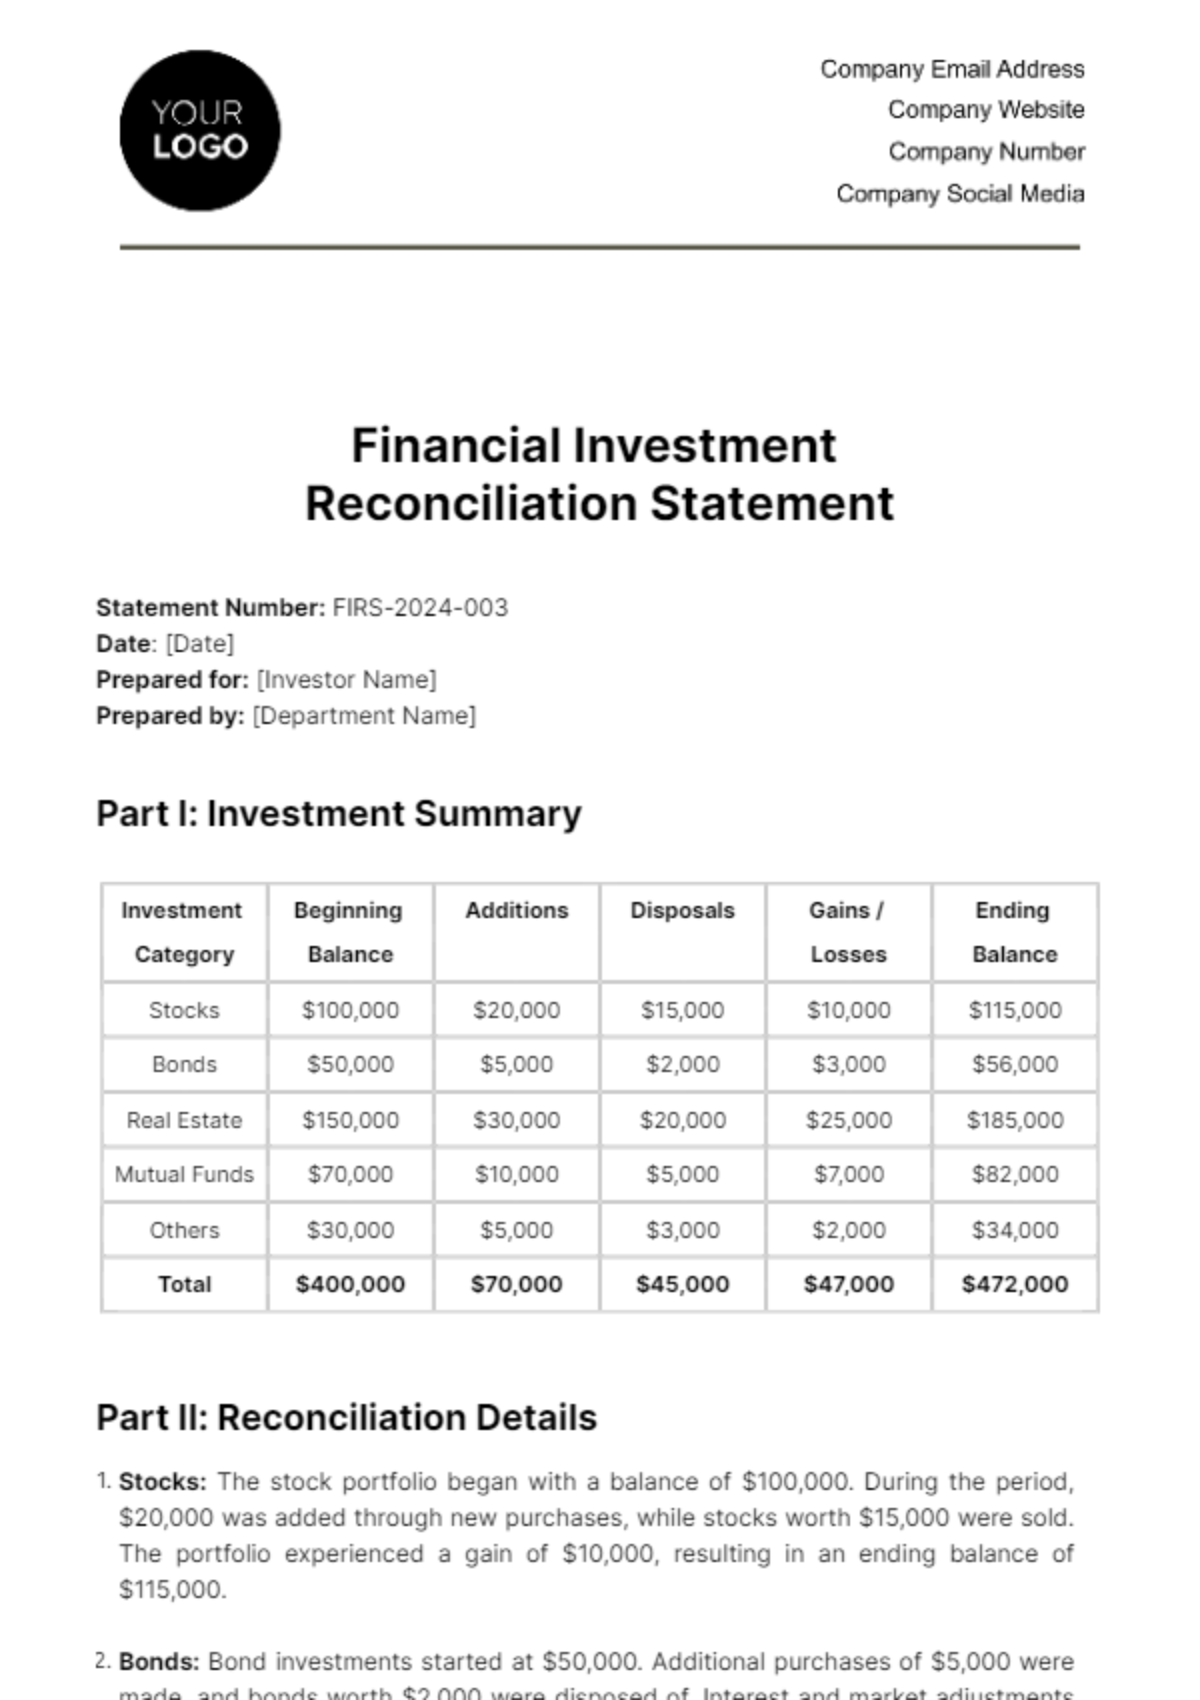 Free Financial Investment Reconciliation Statement Template